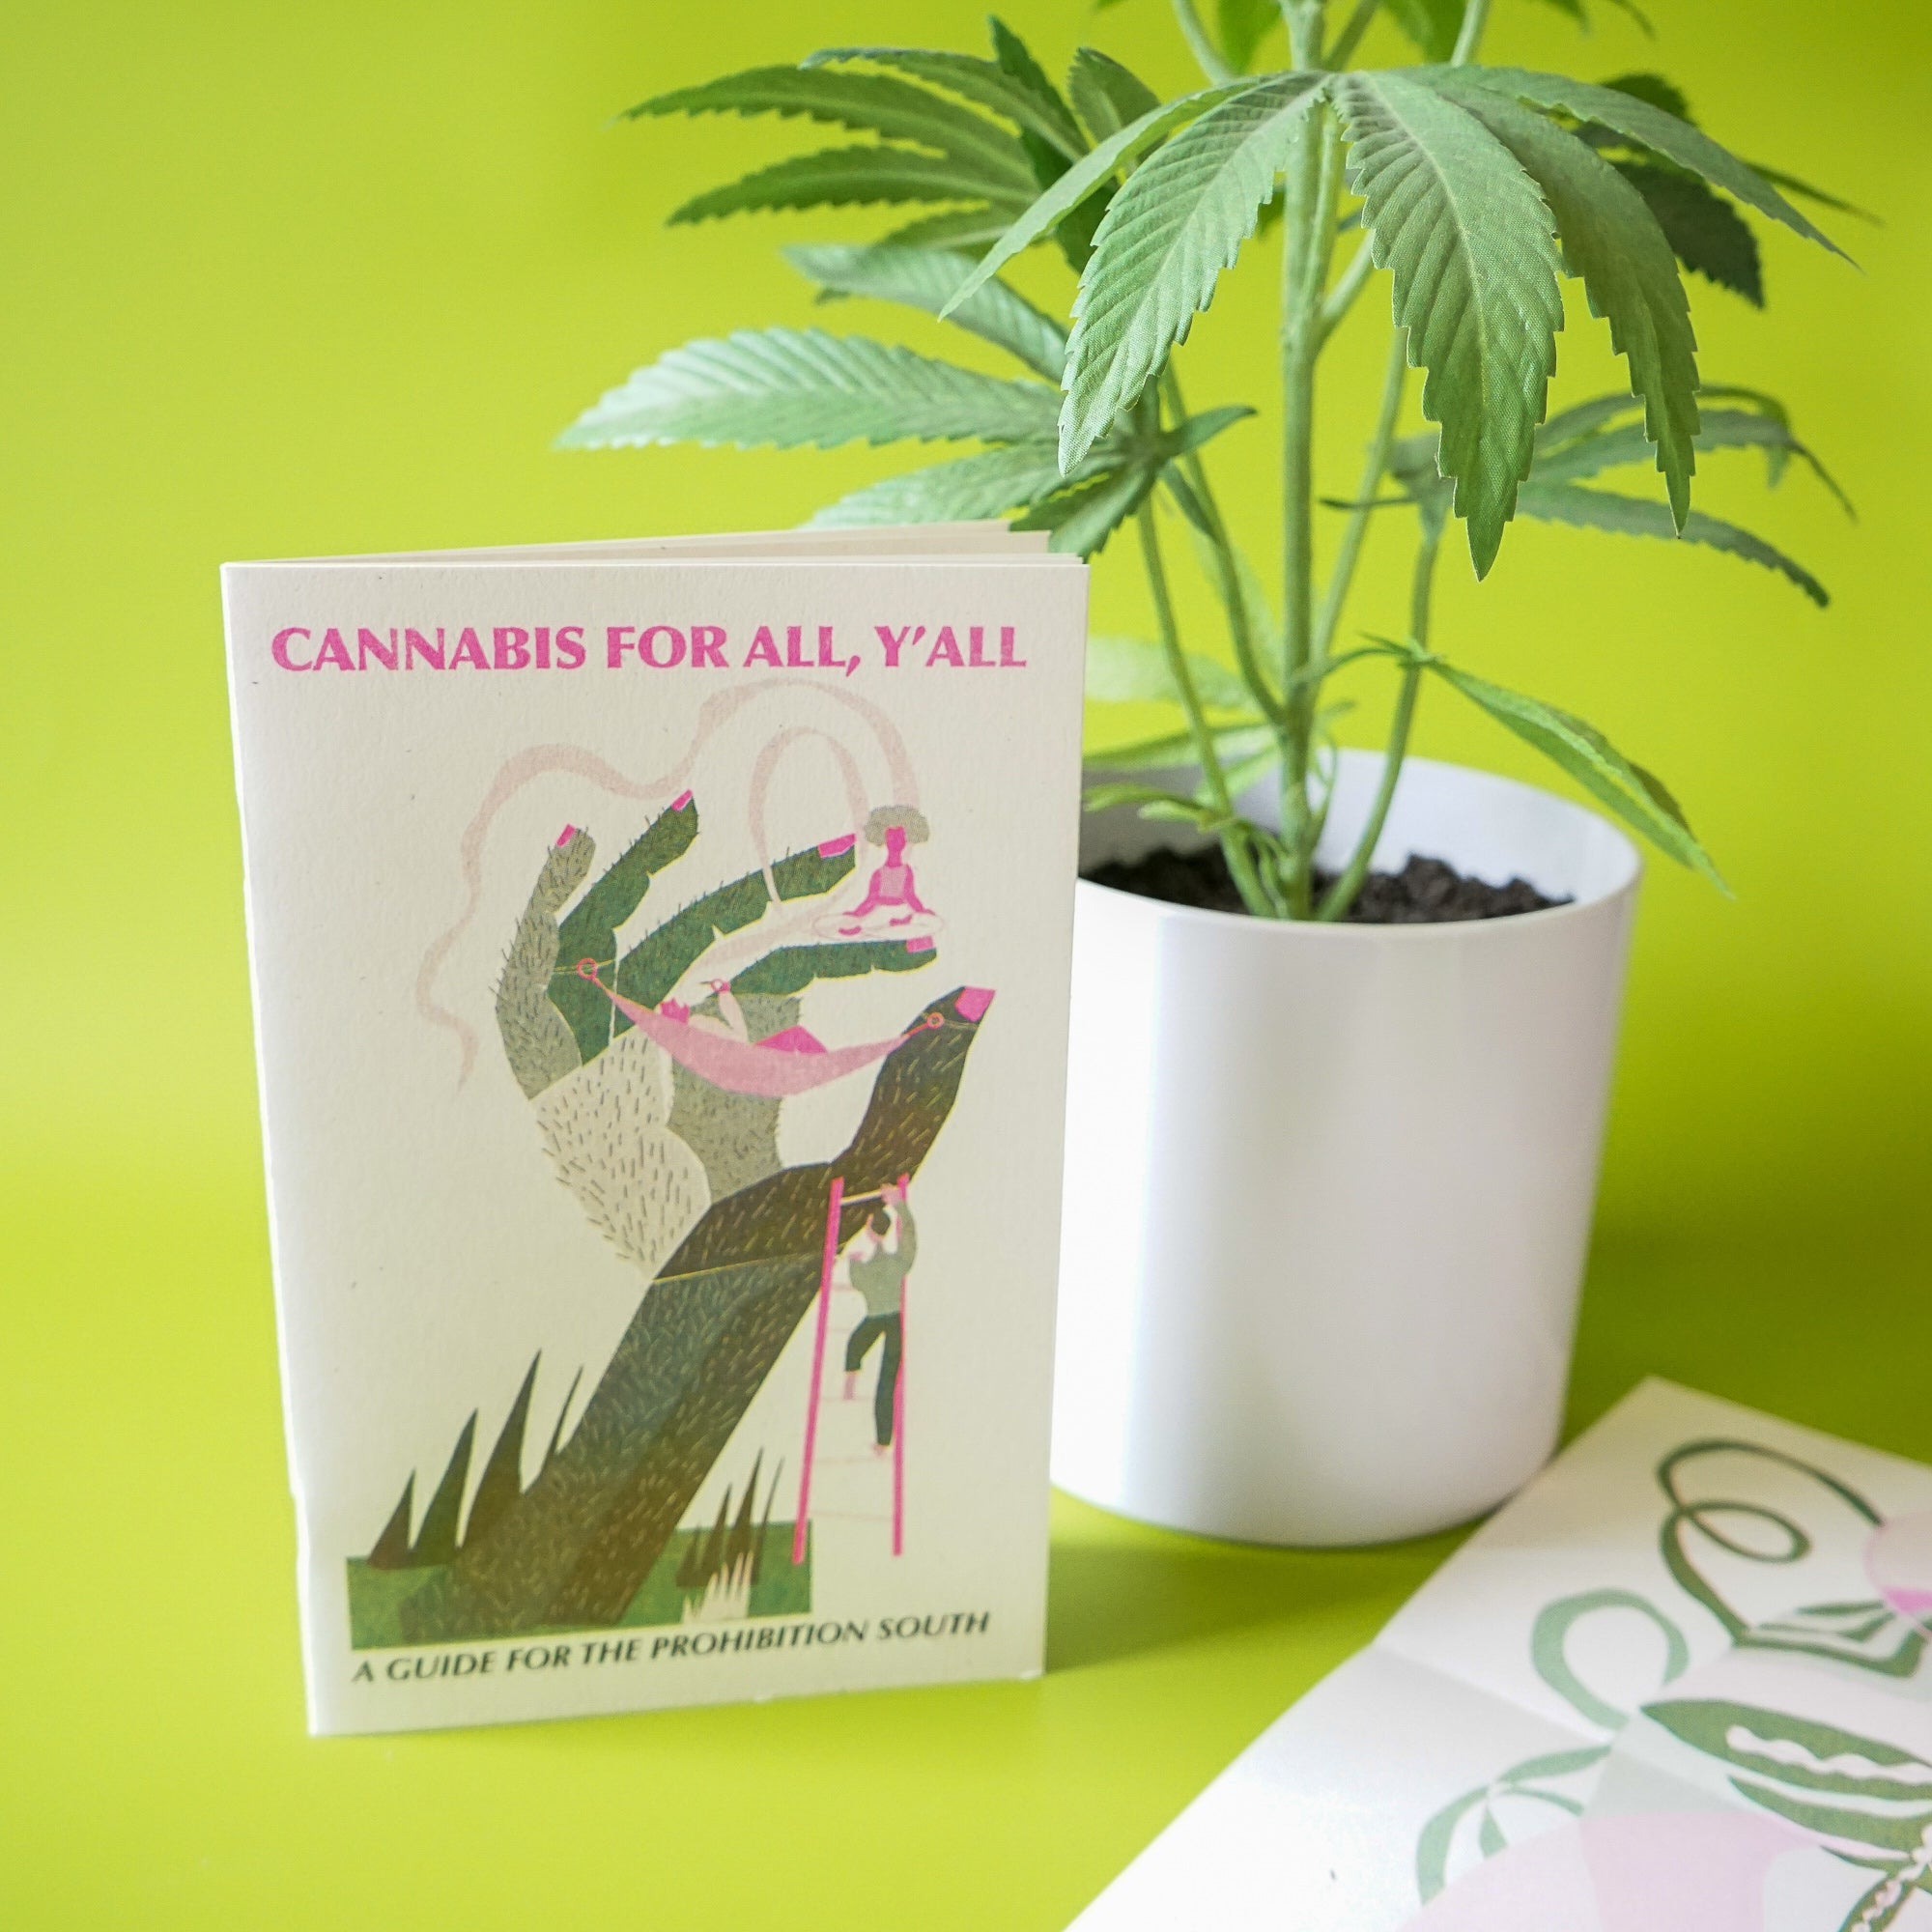 Cannabis for All Y'all: A Guide for the Prohibition South [FREE PDF DOWNLOAD]